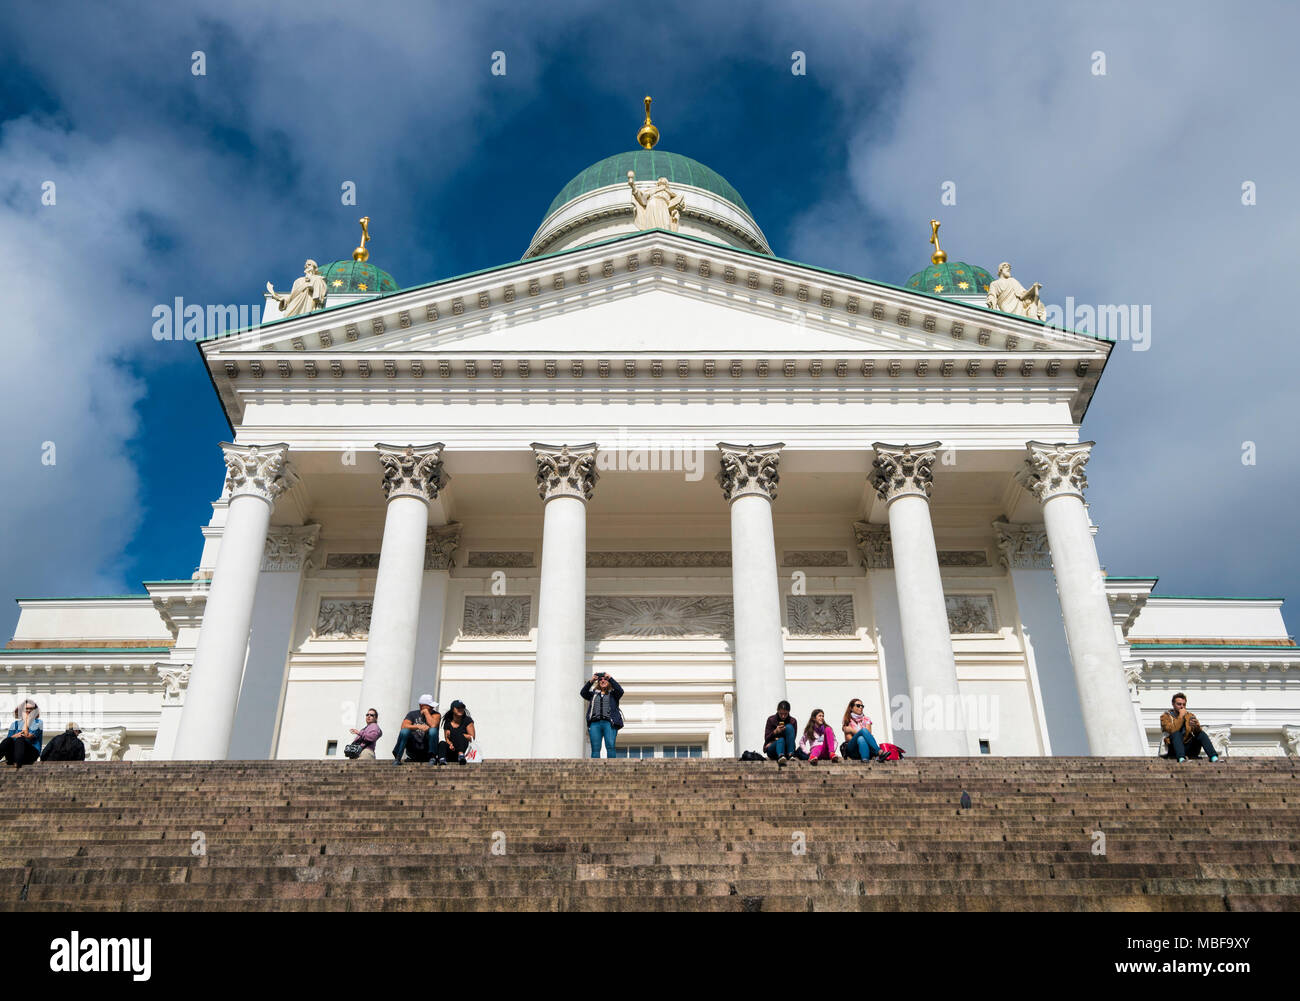 Tourists on the steps of Helsinki Cathedral, Helsinki, Finland, Europe Stock Photo